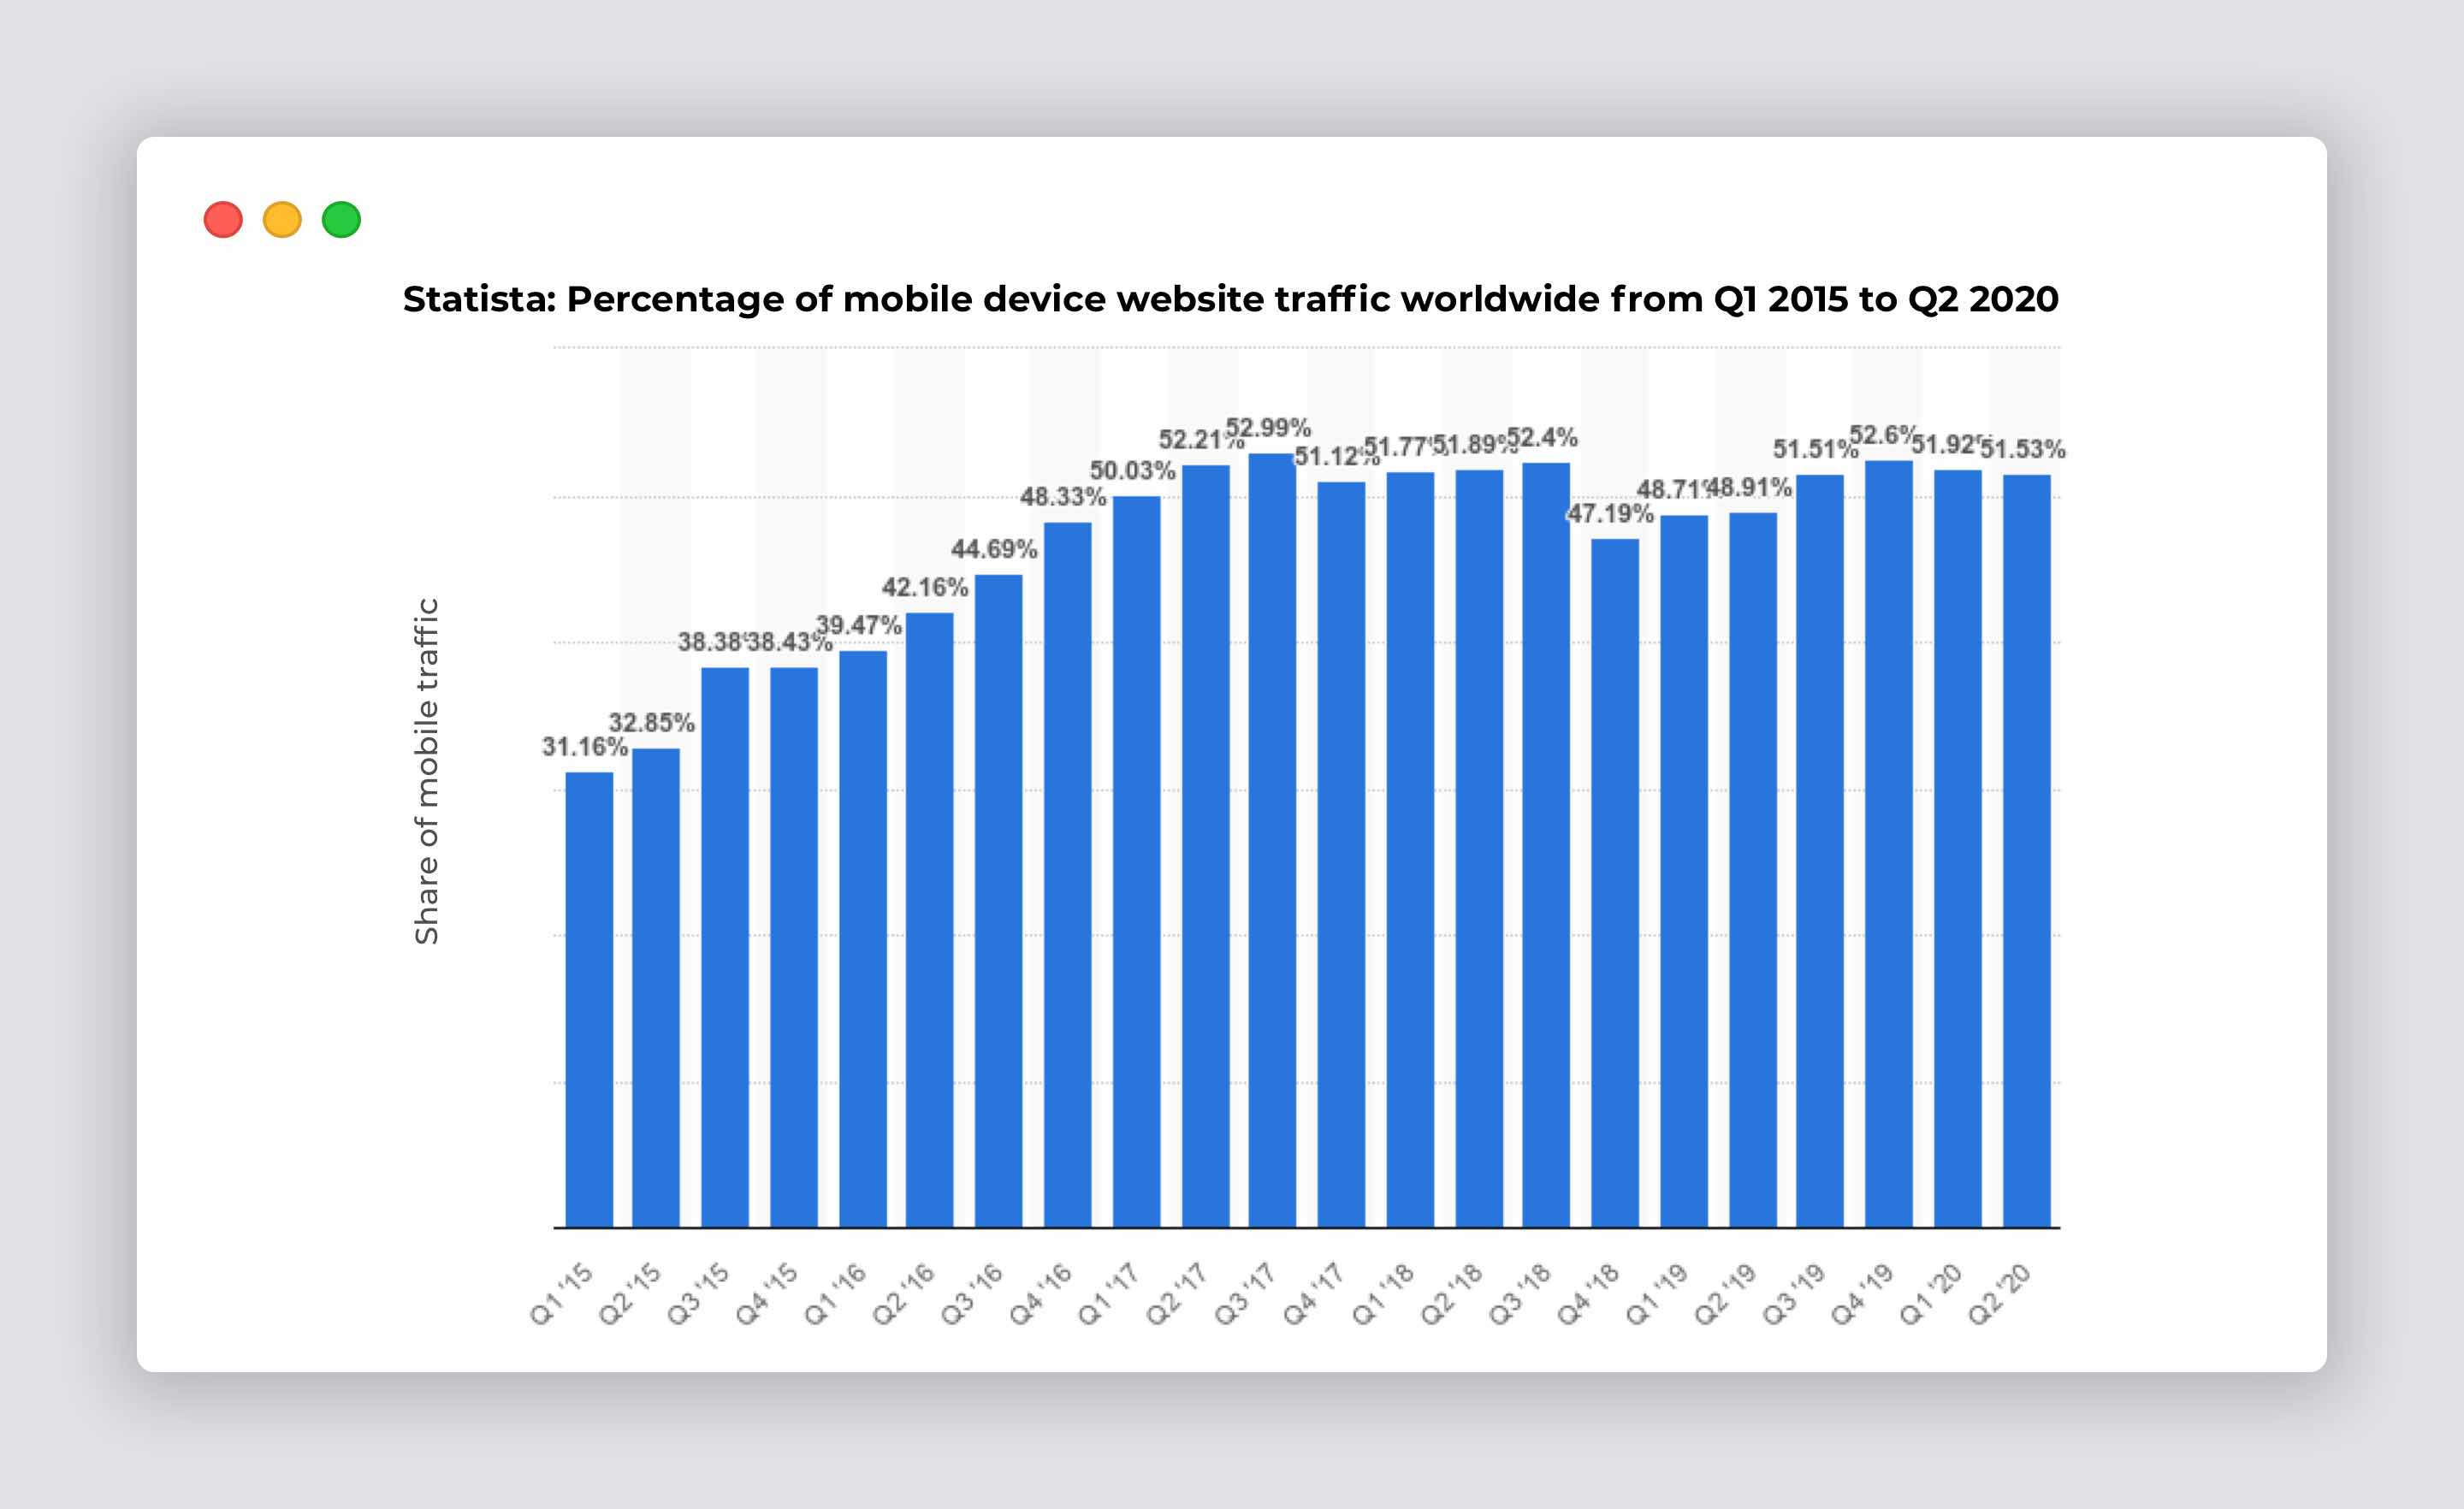 Percentage of mobile device website traffic worldwide from 1st quarter 2015 to 2nd quarter 2020